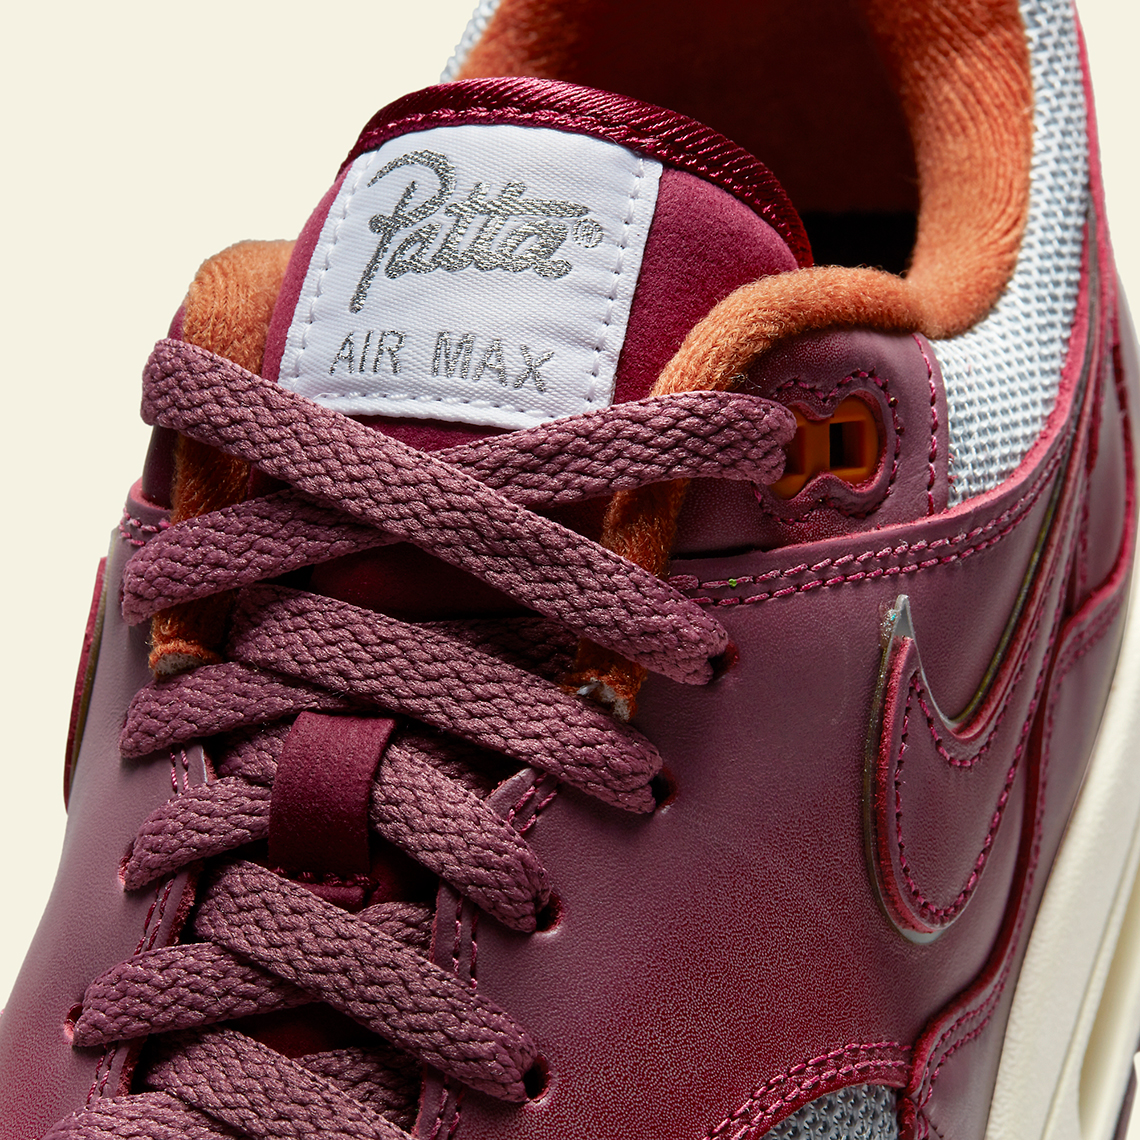 Patta x Nike Air Max 1 “Pink/Maroon”: First Official Look & Info